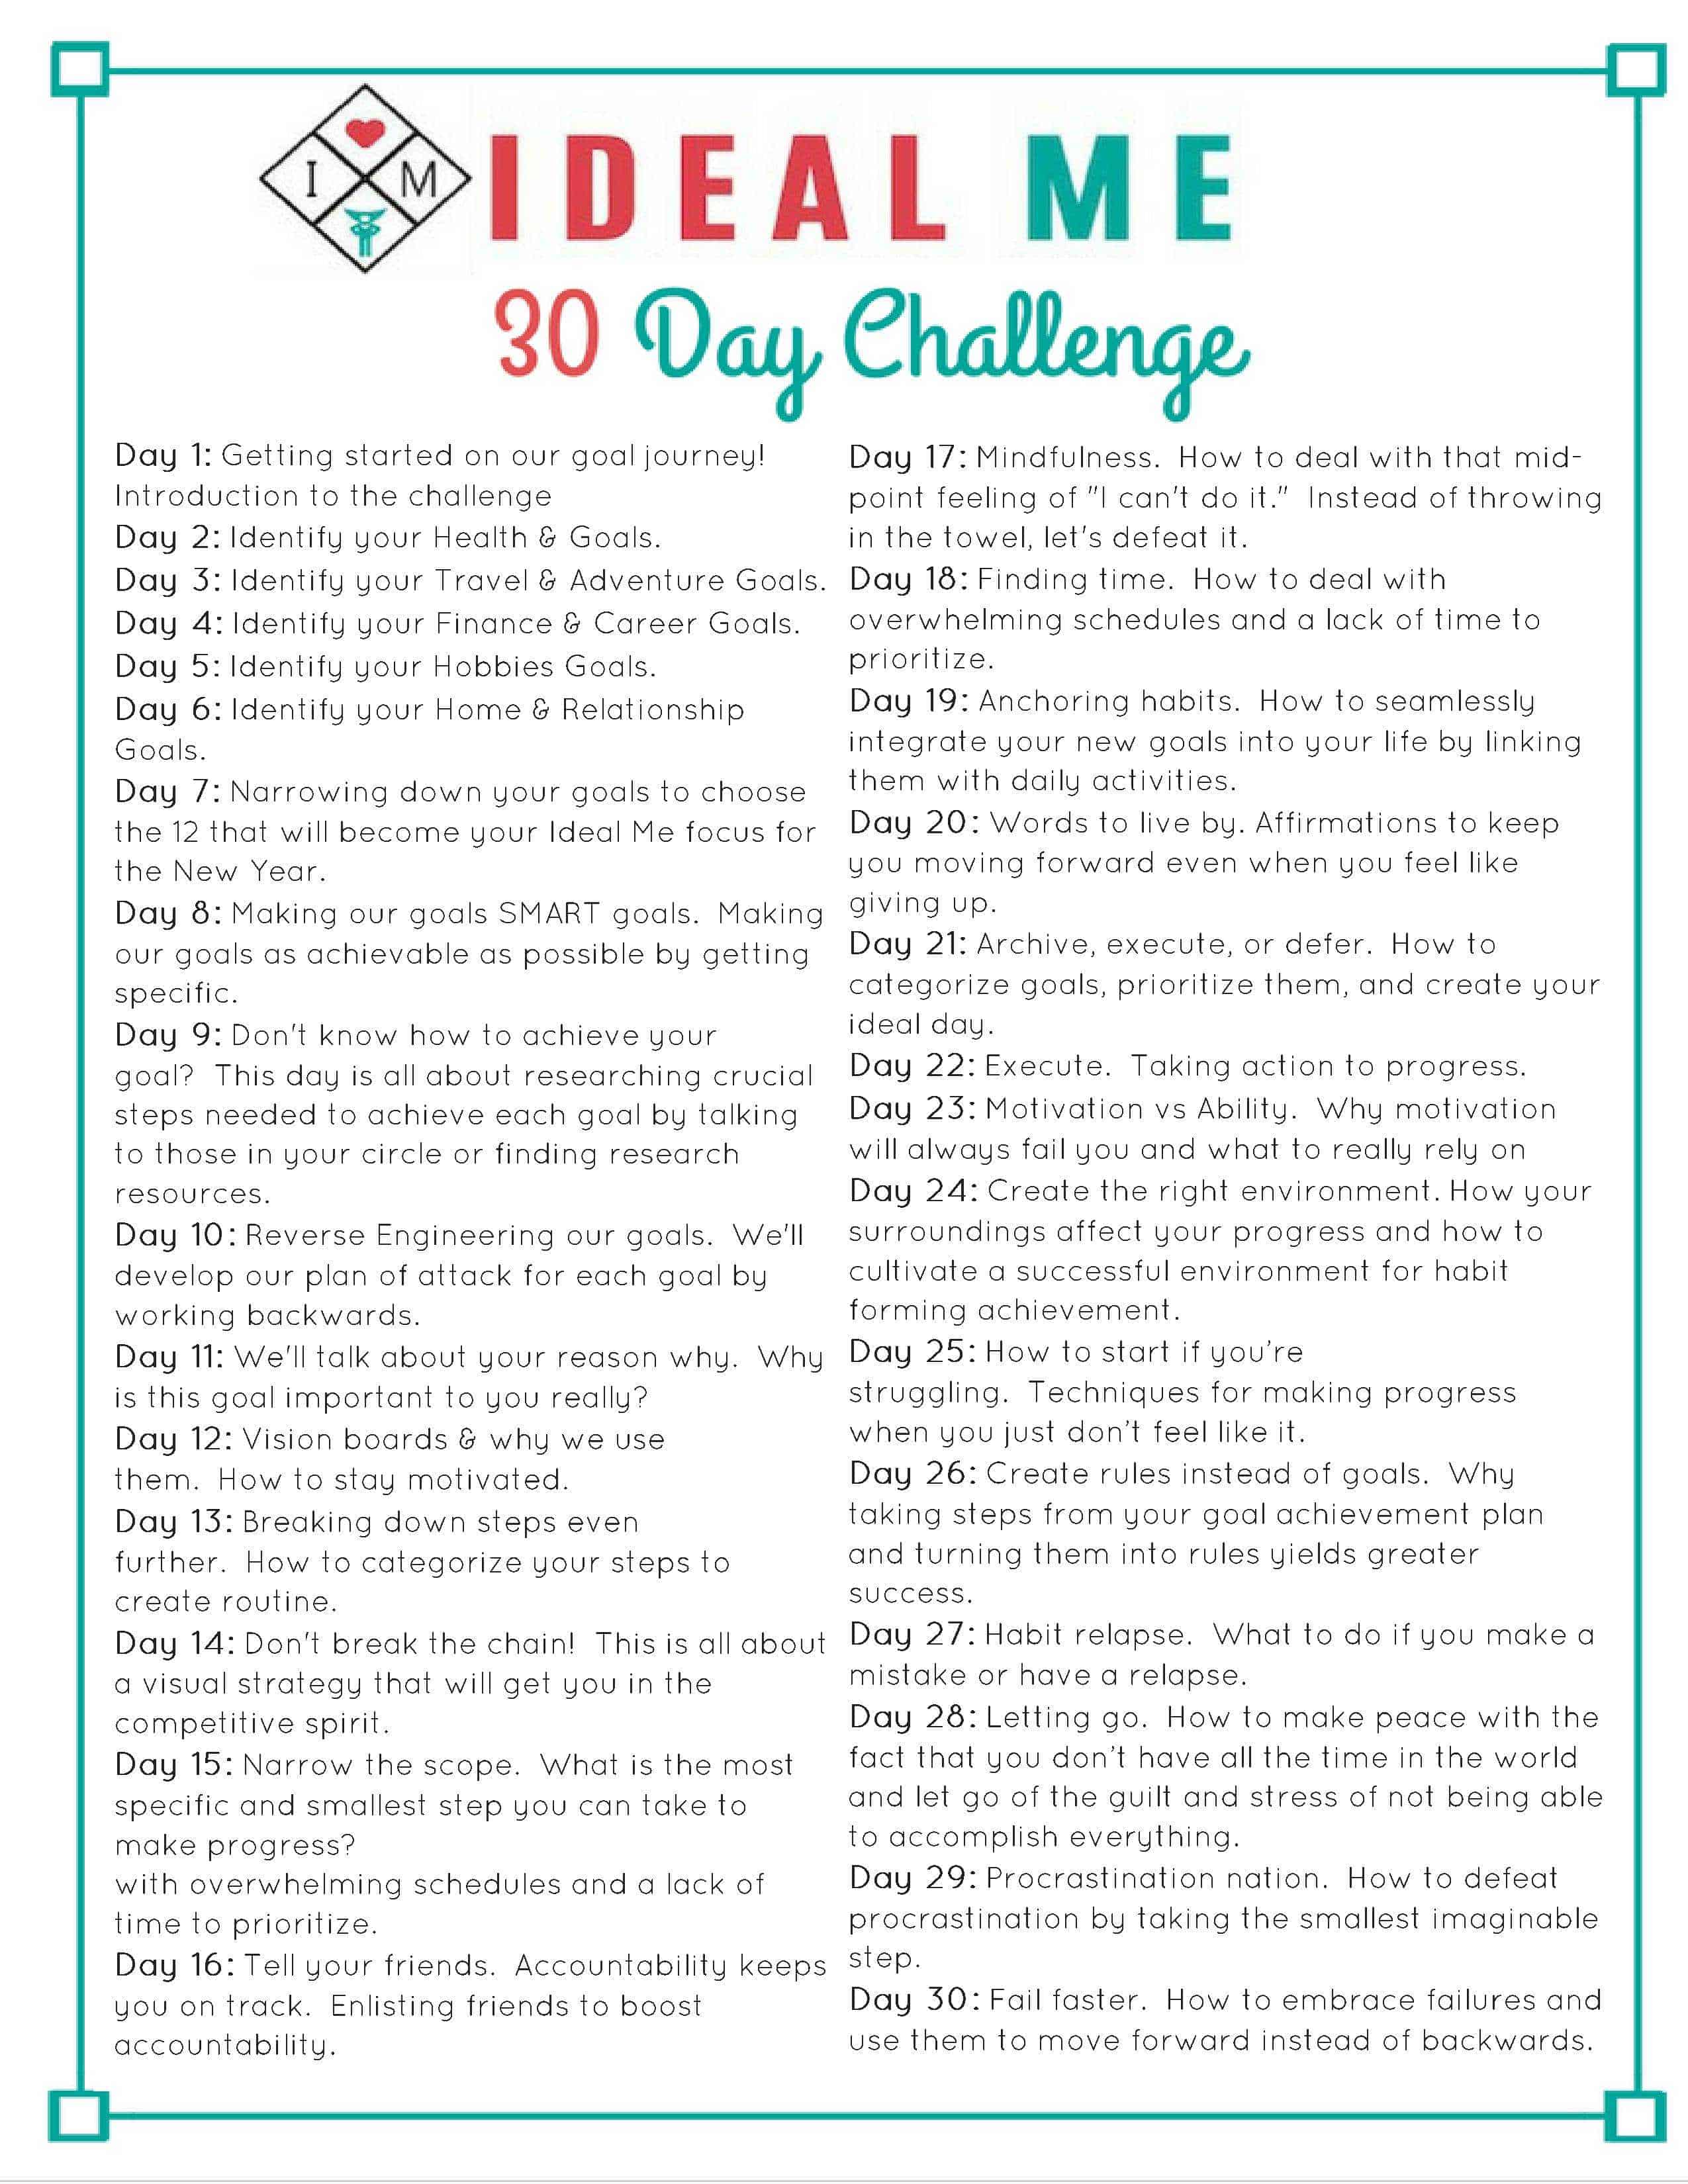 30 Day Ideal Me Challenge - A FREE 30 day challenge including videos and printables to help you create your ideal self and help you make your goals reality.